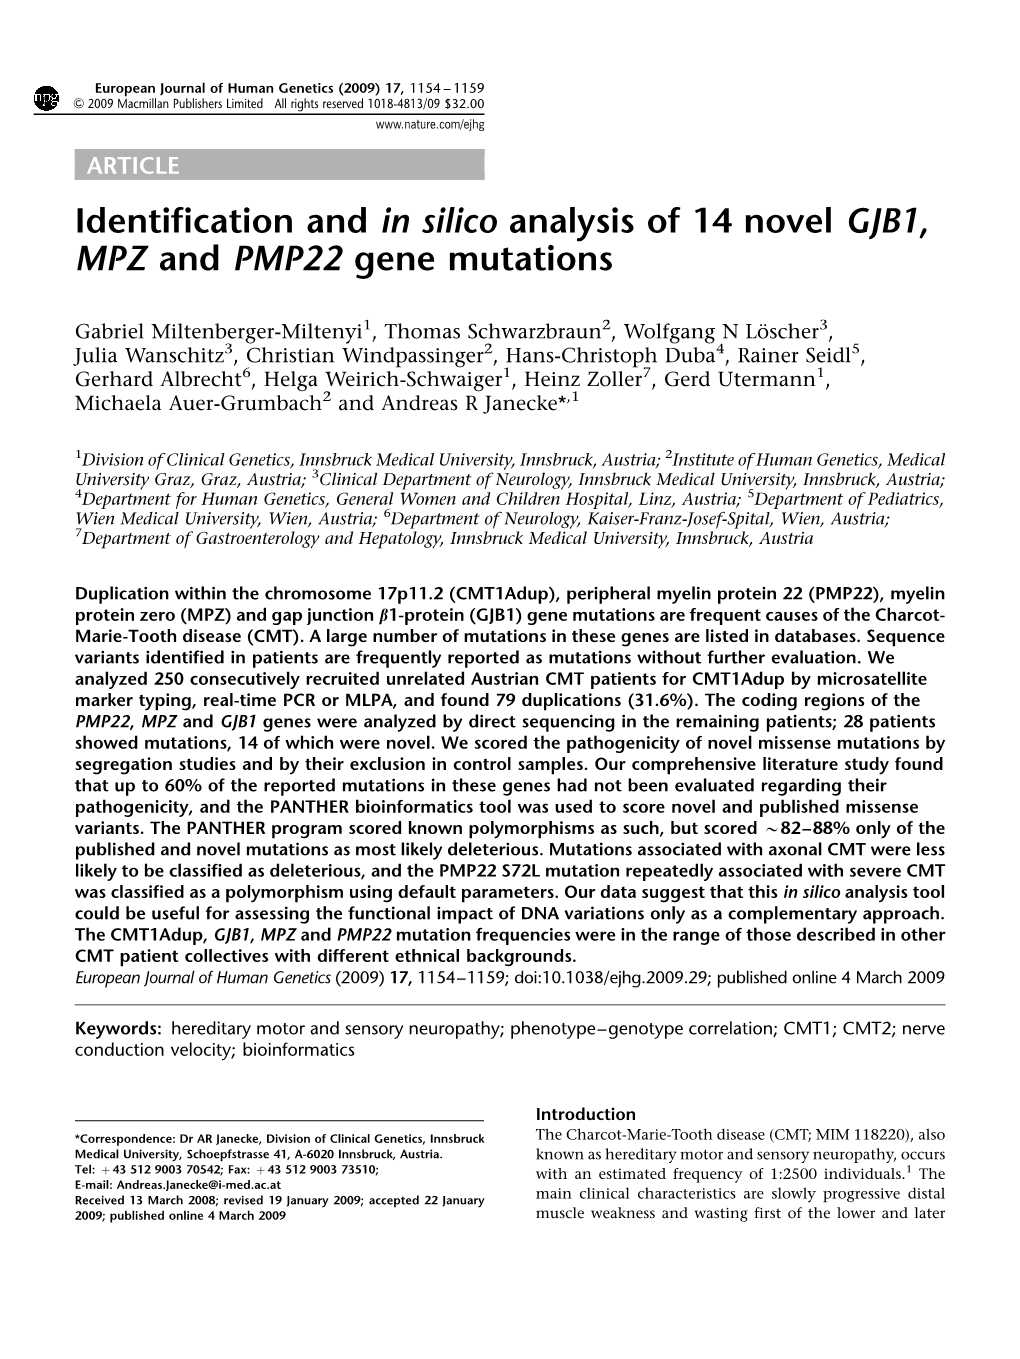 Identification and in Silico Analysis of 14 Novel GJB1, MPZ and PMP22 Gene Mutations